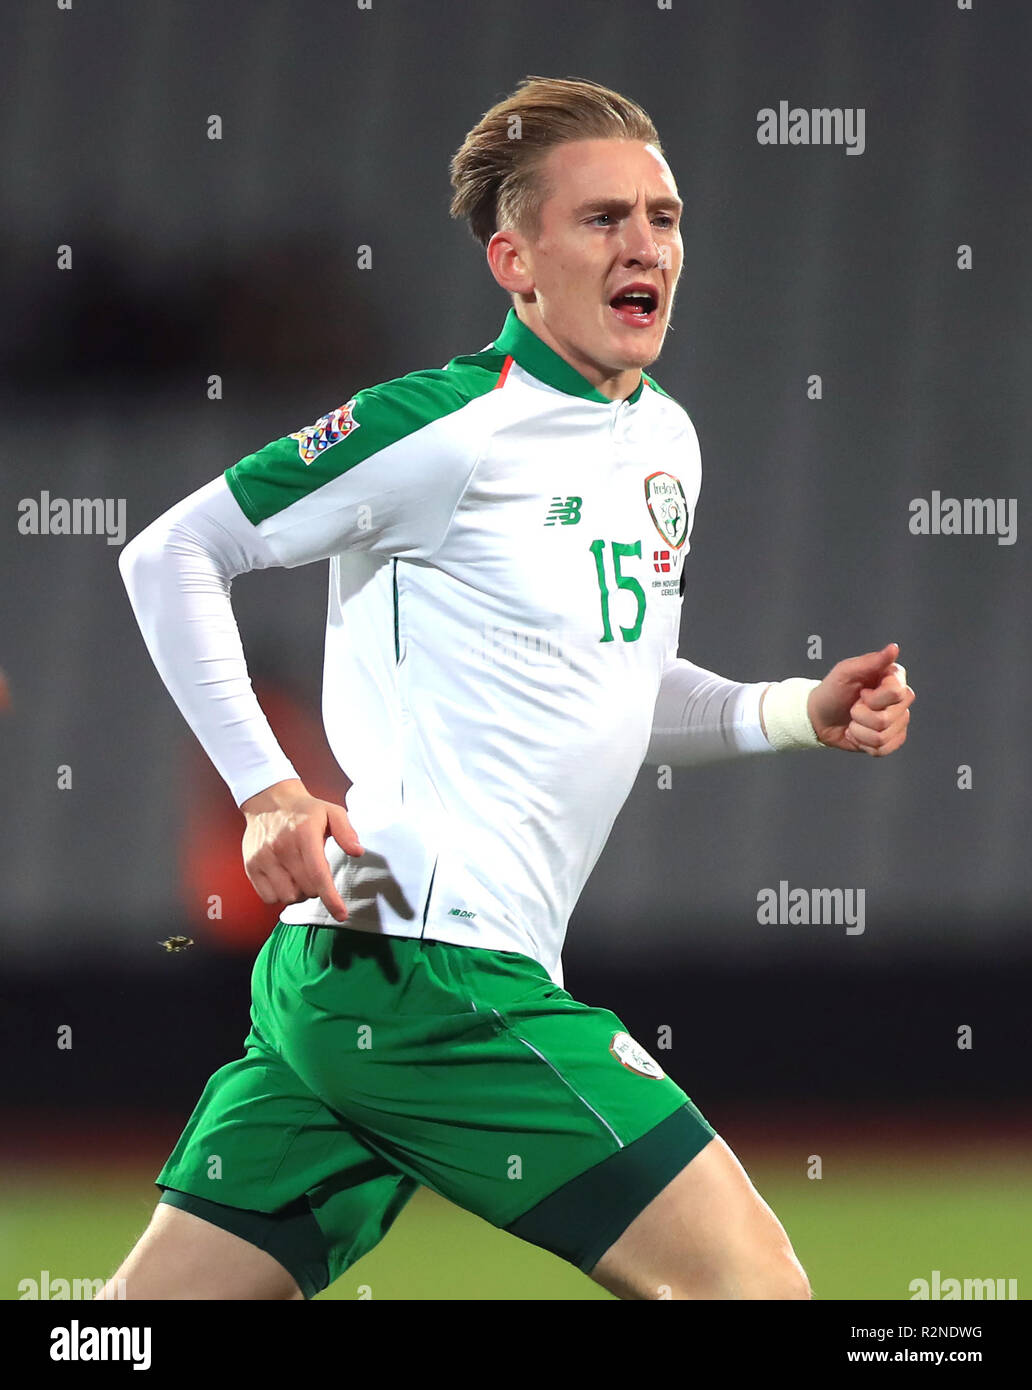 Republic of Ireland's Ronan Curtis during the UEFA Nations League, Group B4 match at Ceres Park, Aarhus. PRESS ASSOCIATION Photo. Picture date: Monday November 19, 2018. See PA story SOCCER Denmark. Photo credit should read: Simon Cooper/PA Wire. Stock Photo